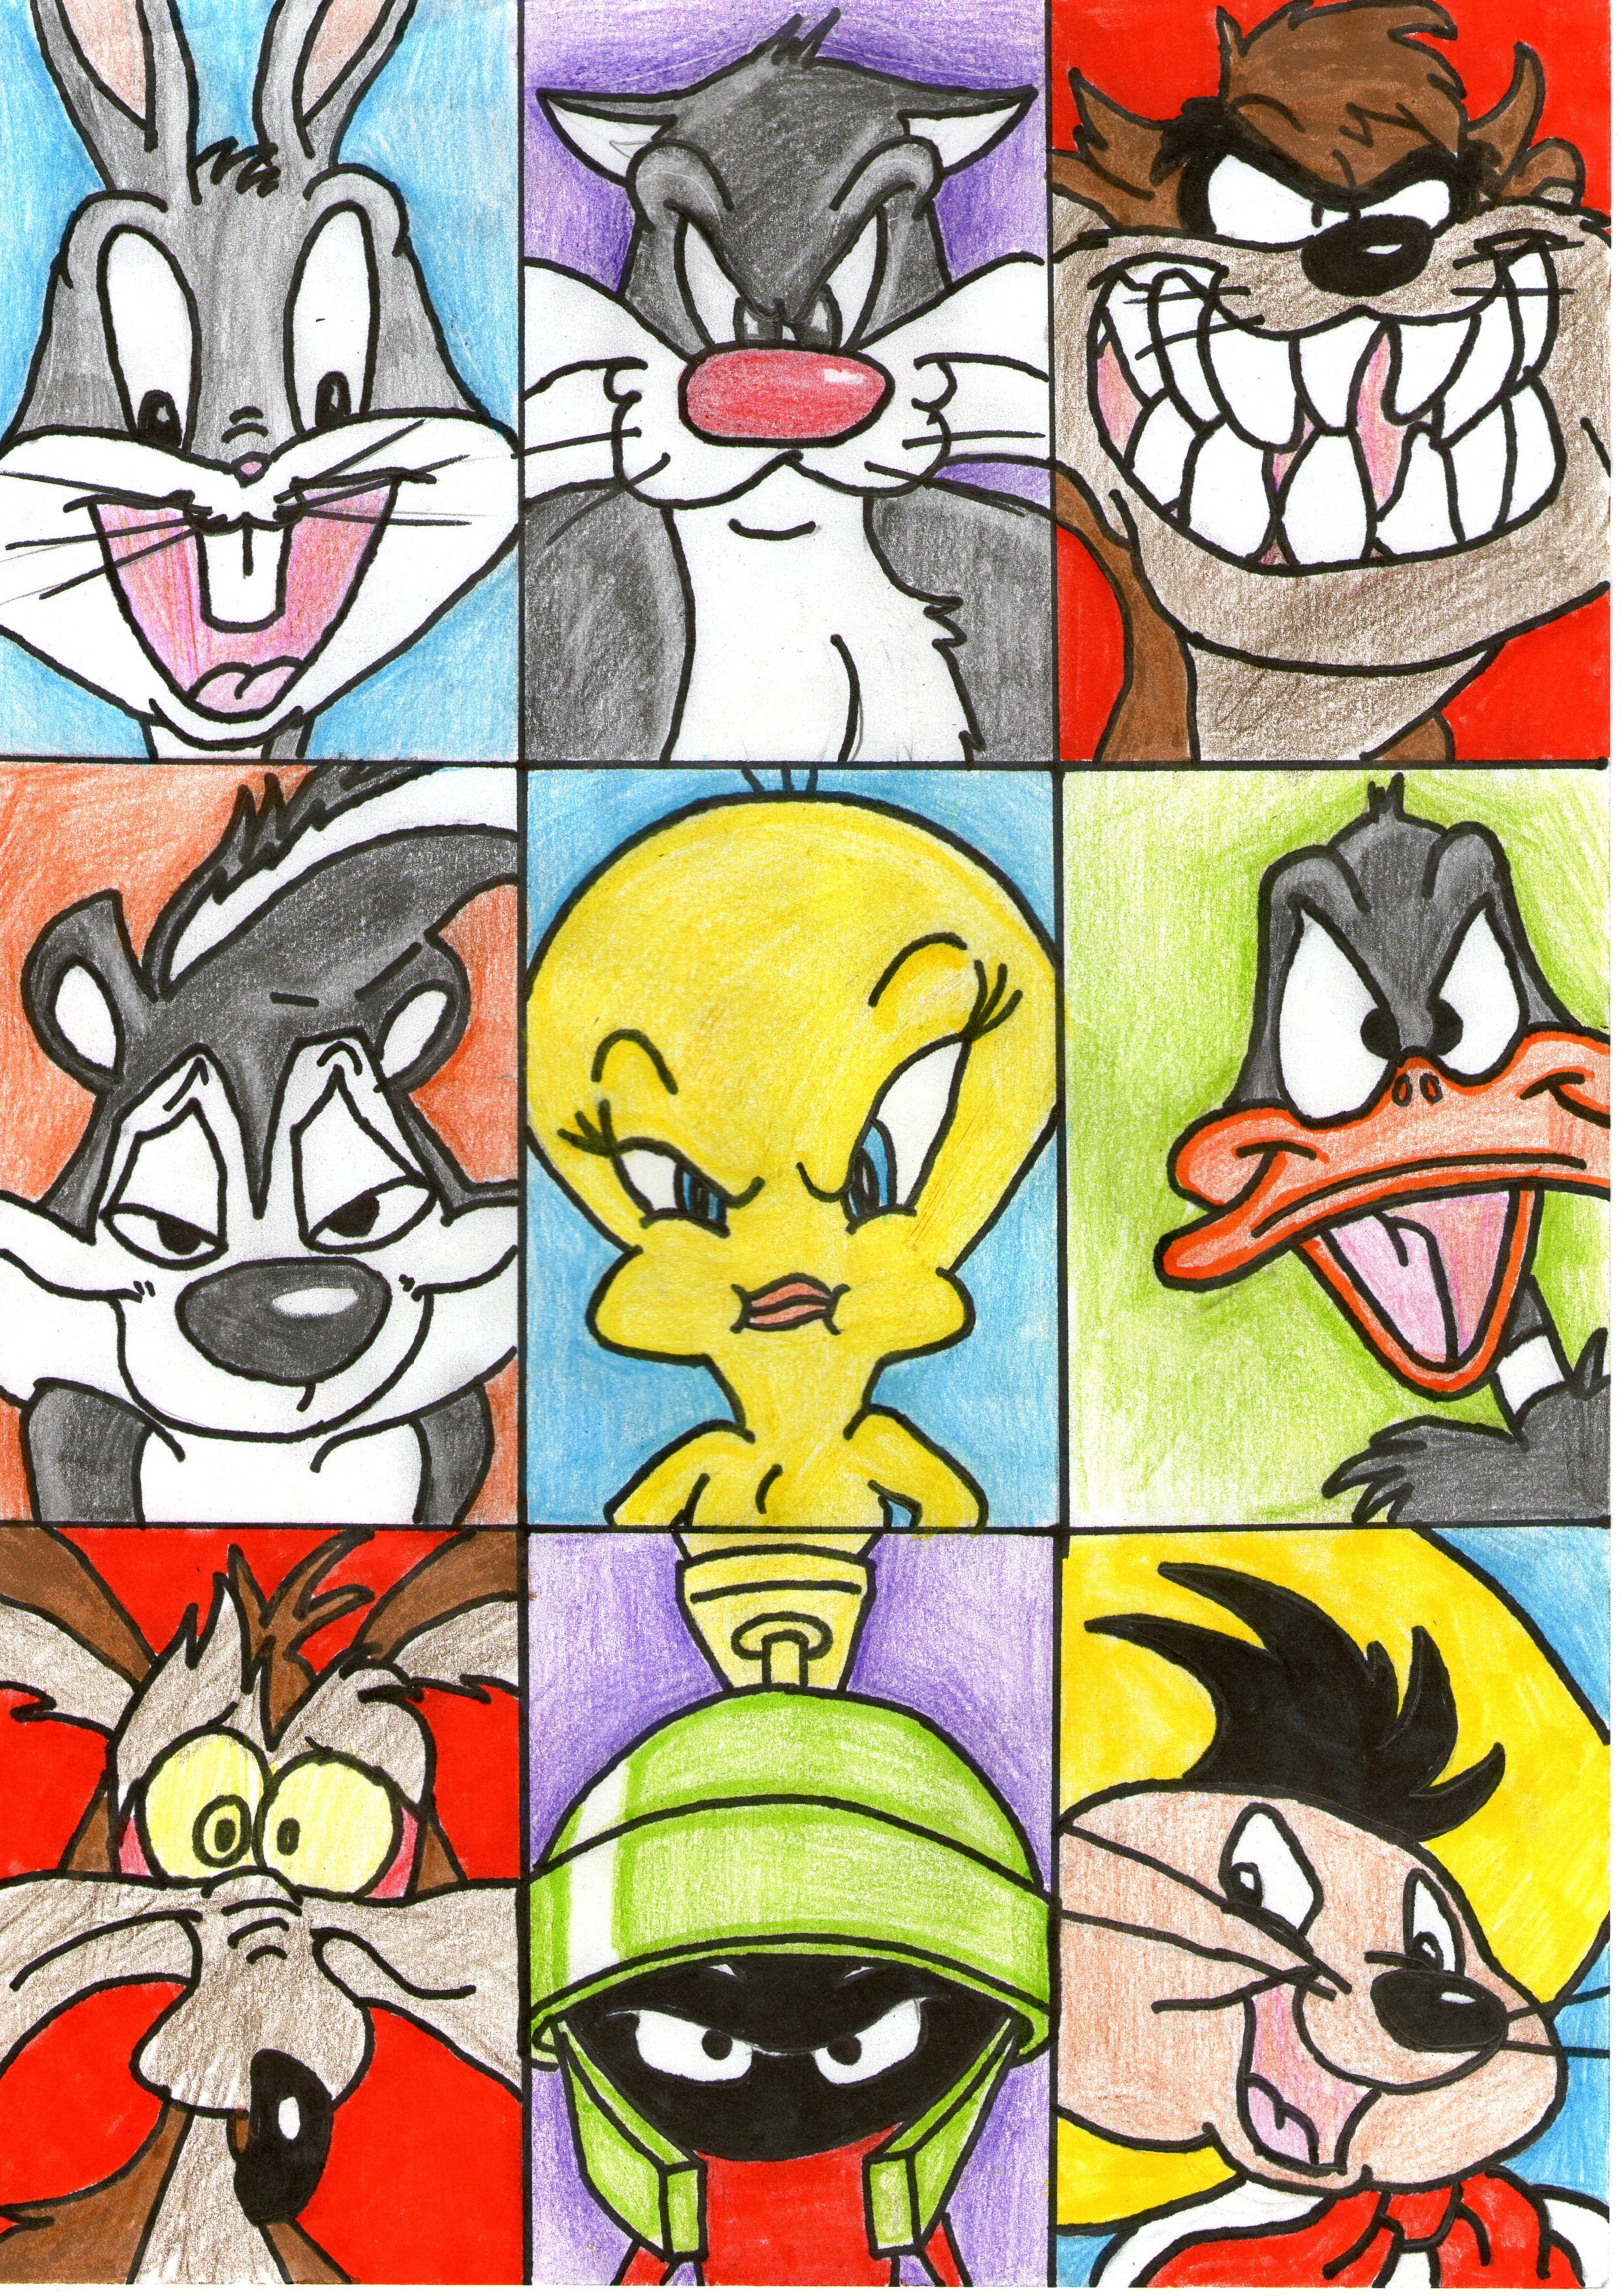 Looney Tunes Drawing Wallpaper Image For Iphone 6 Cartoons - Looney Tunes Wallpaper Iphone , HD Wallpaper & Backgrounds